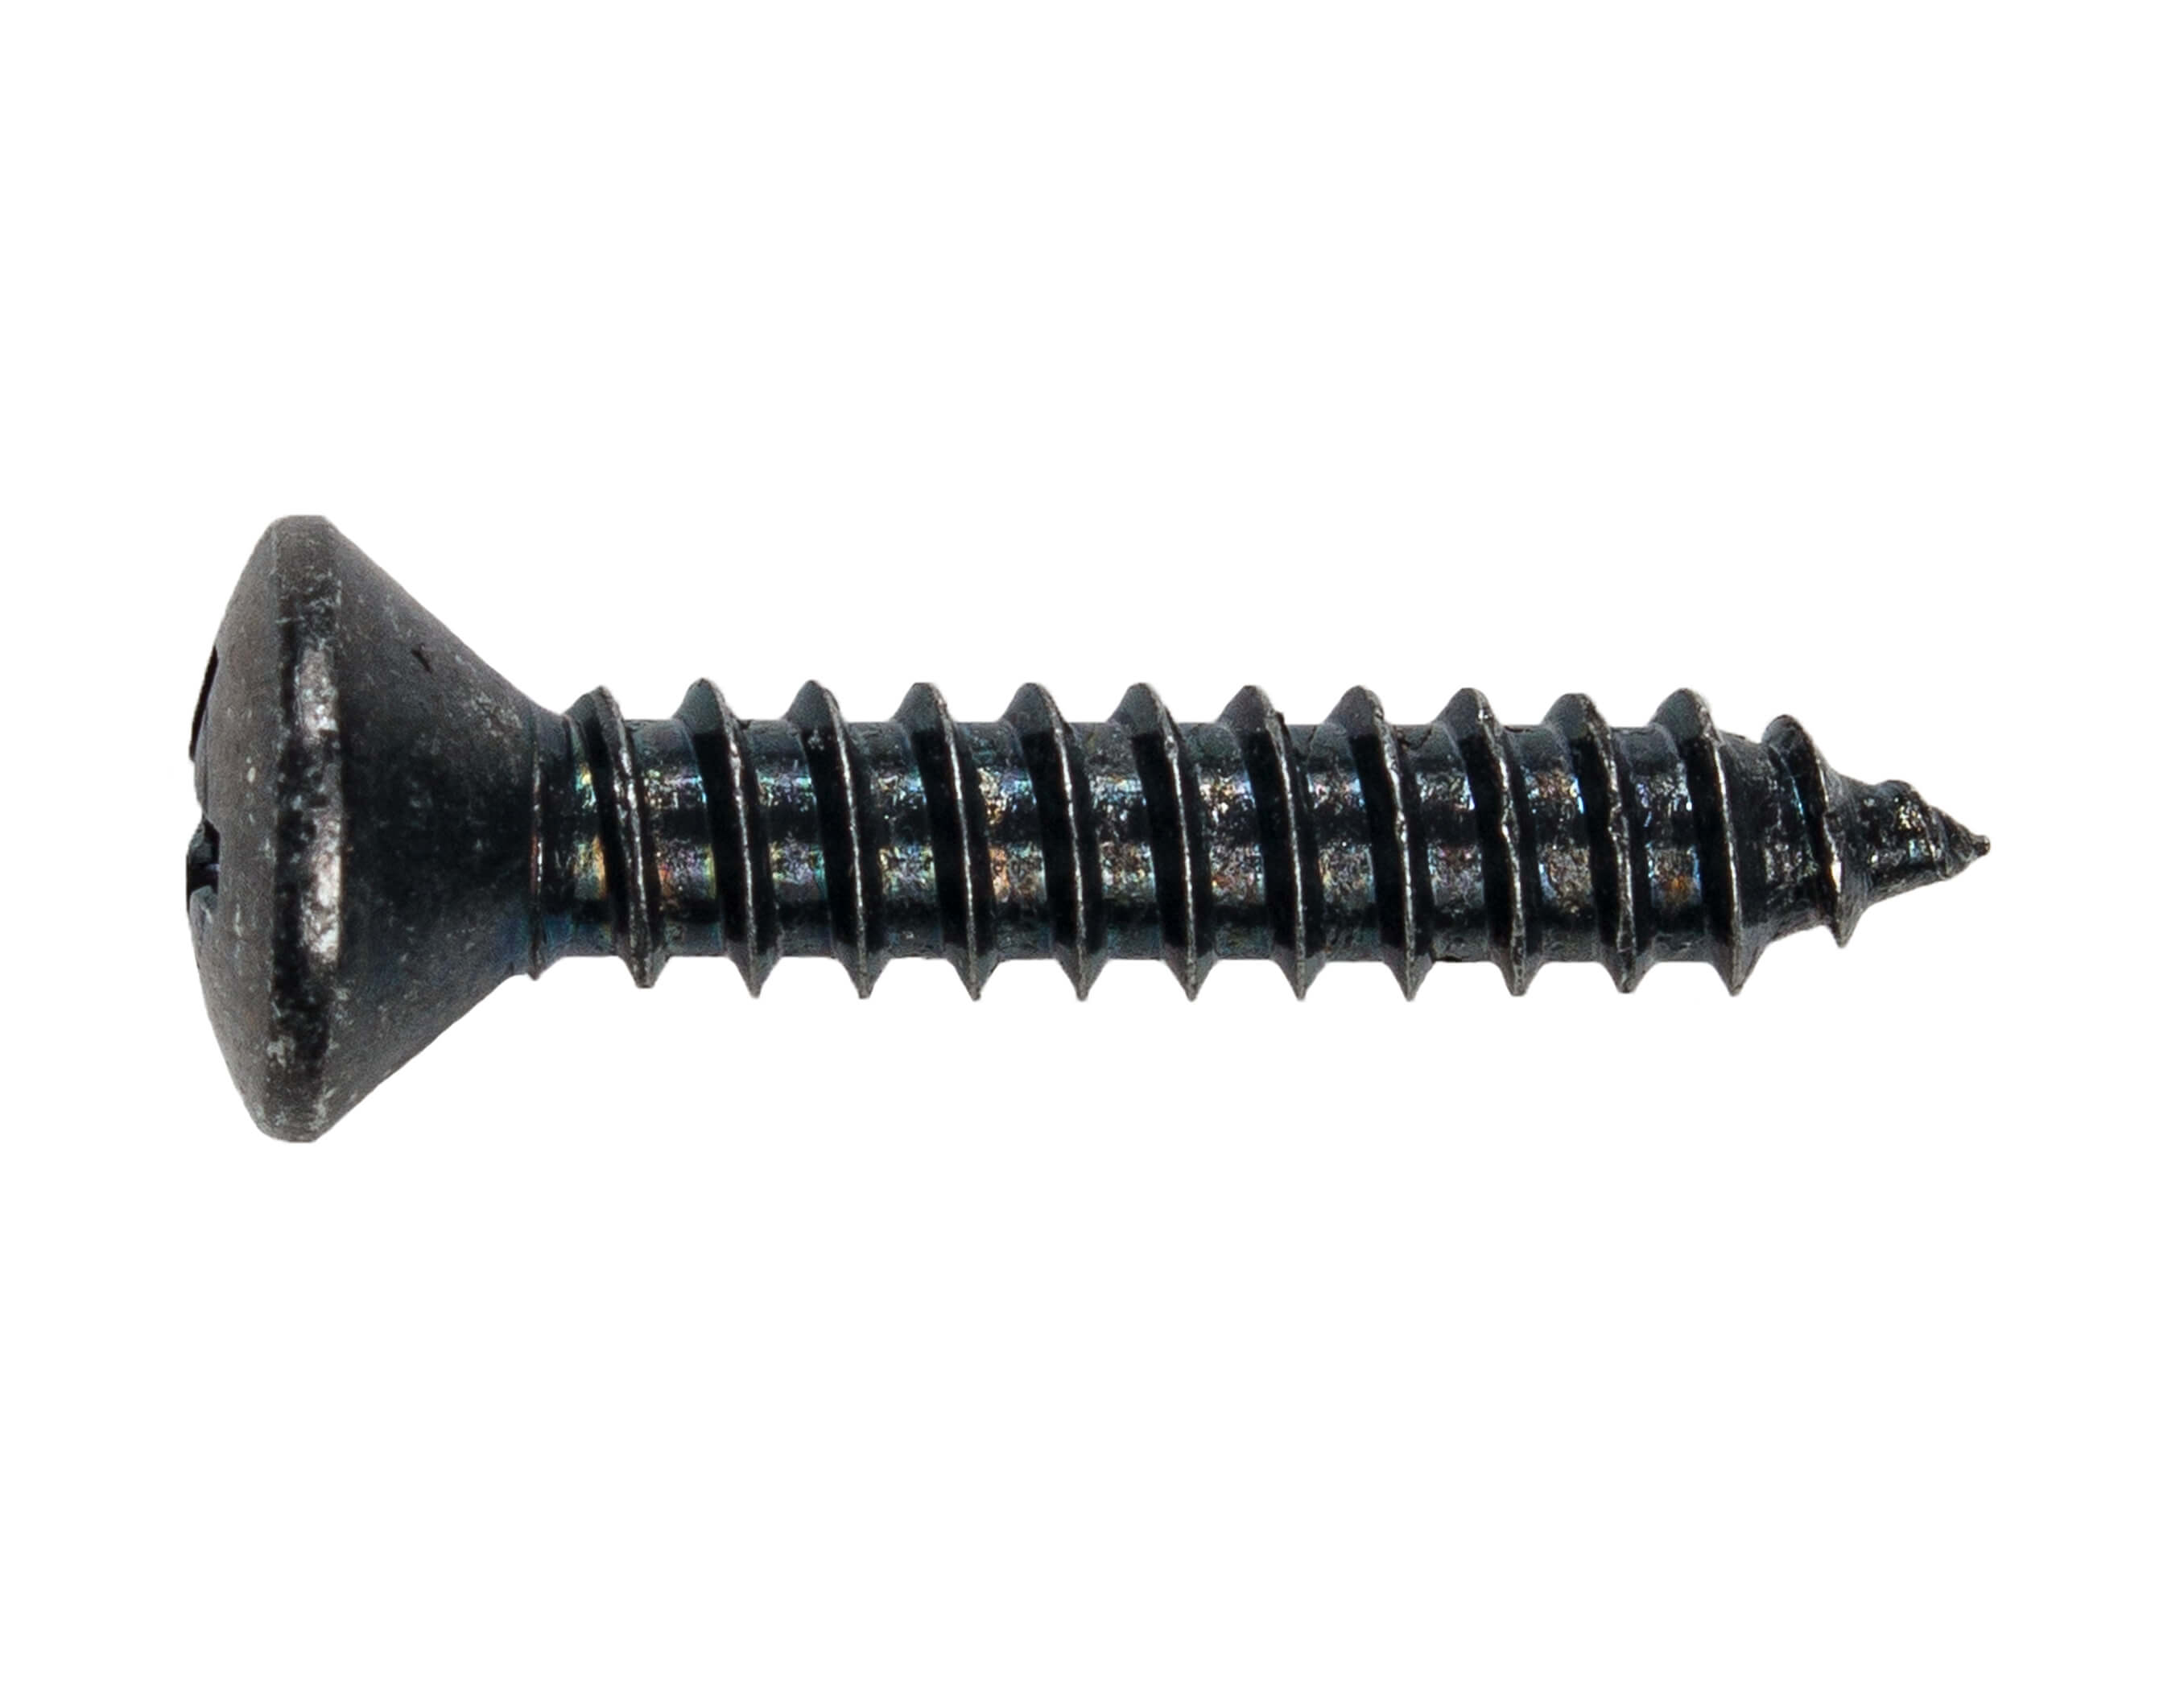 4.8X25 SMS (TAPPING) SCREW OVAL PH BLK DIN7983